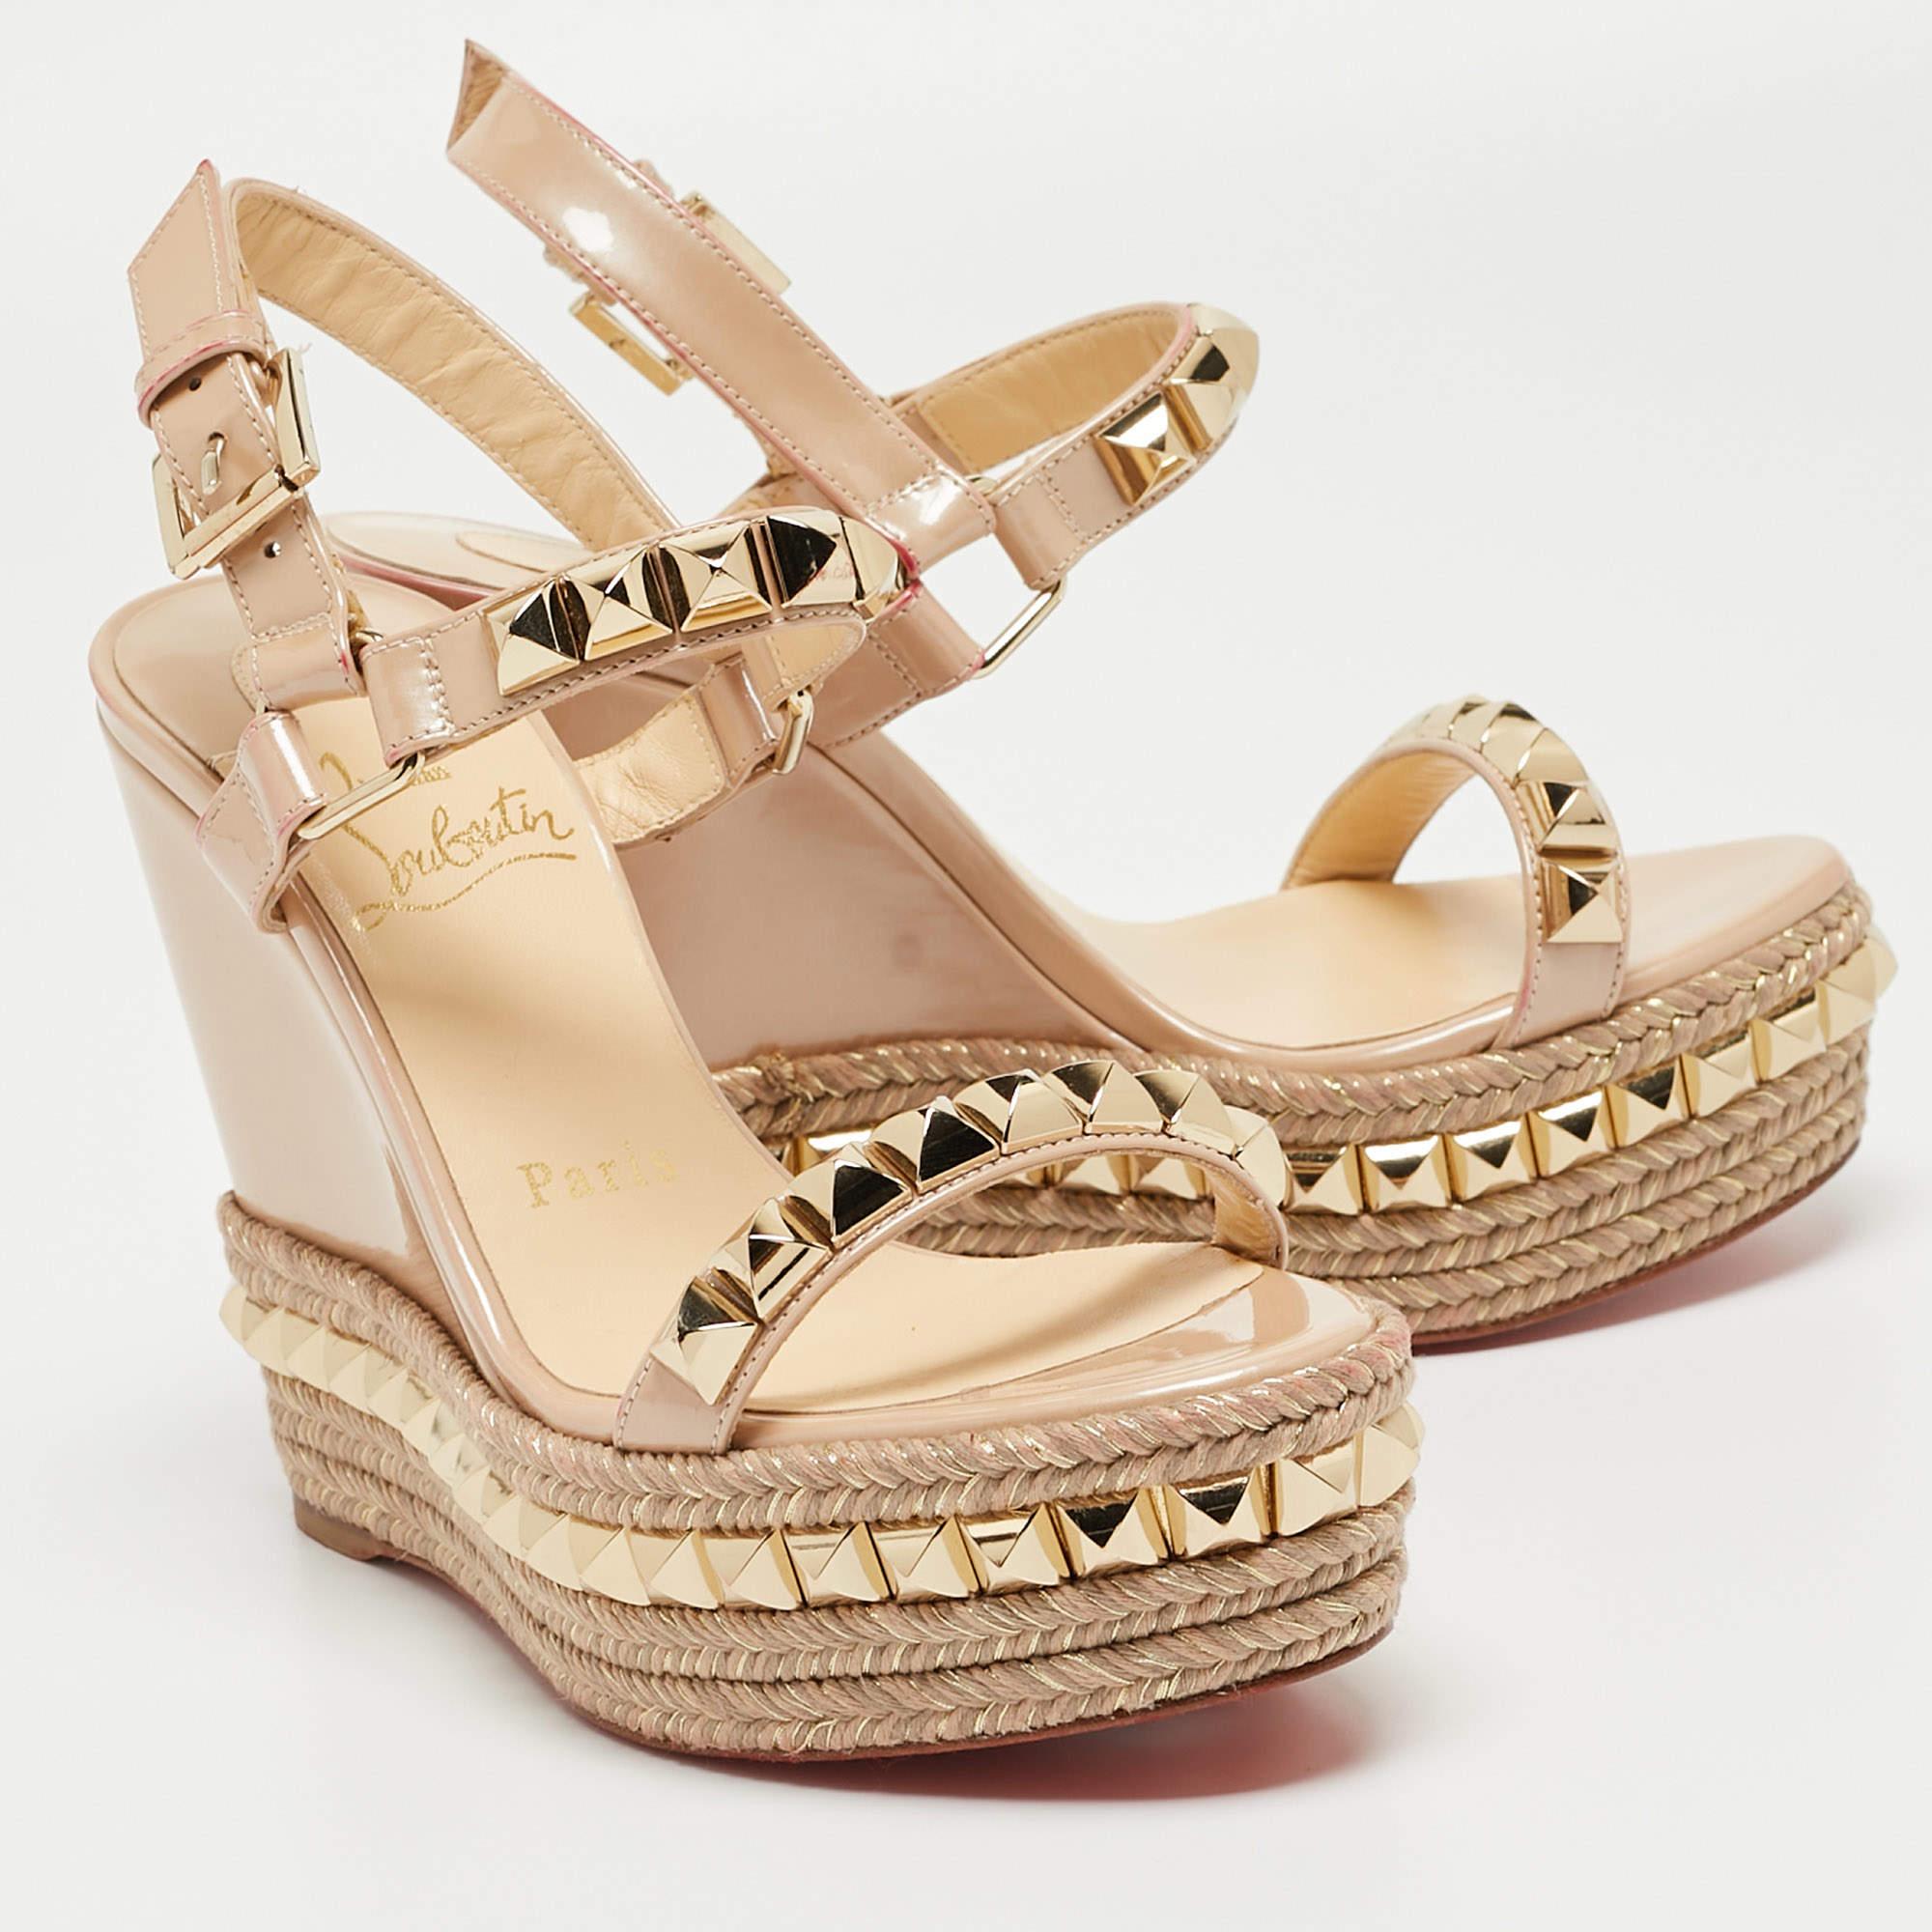 Christian Louboutin Beige Patent Leather Pyraclou Wedge Sandals Size 35 For Sale 3